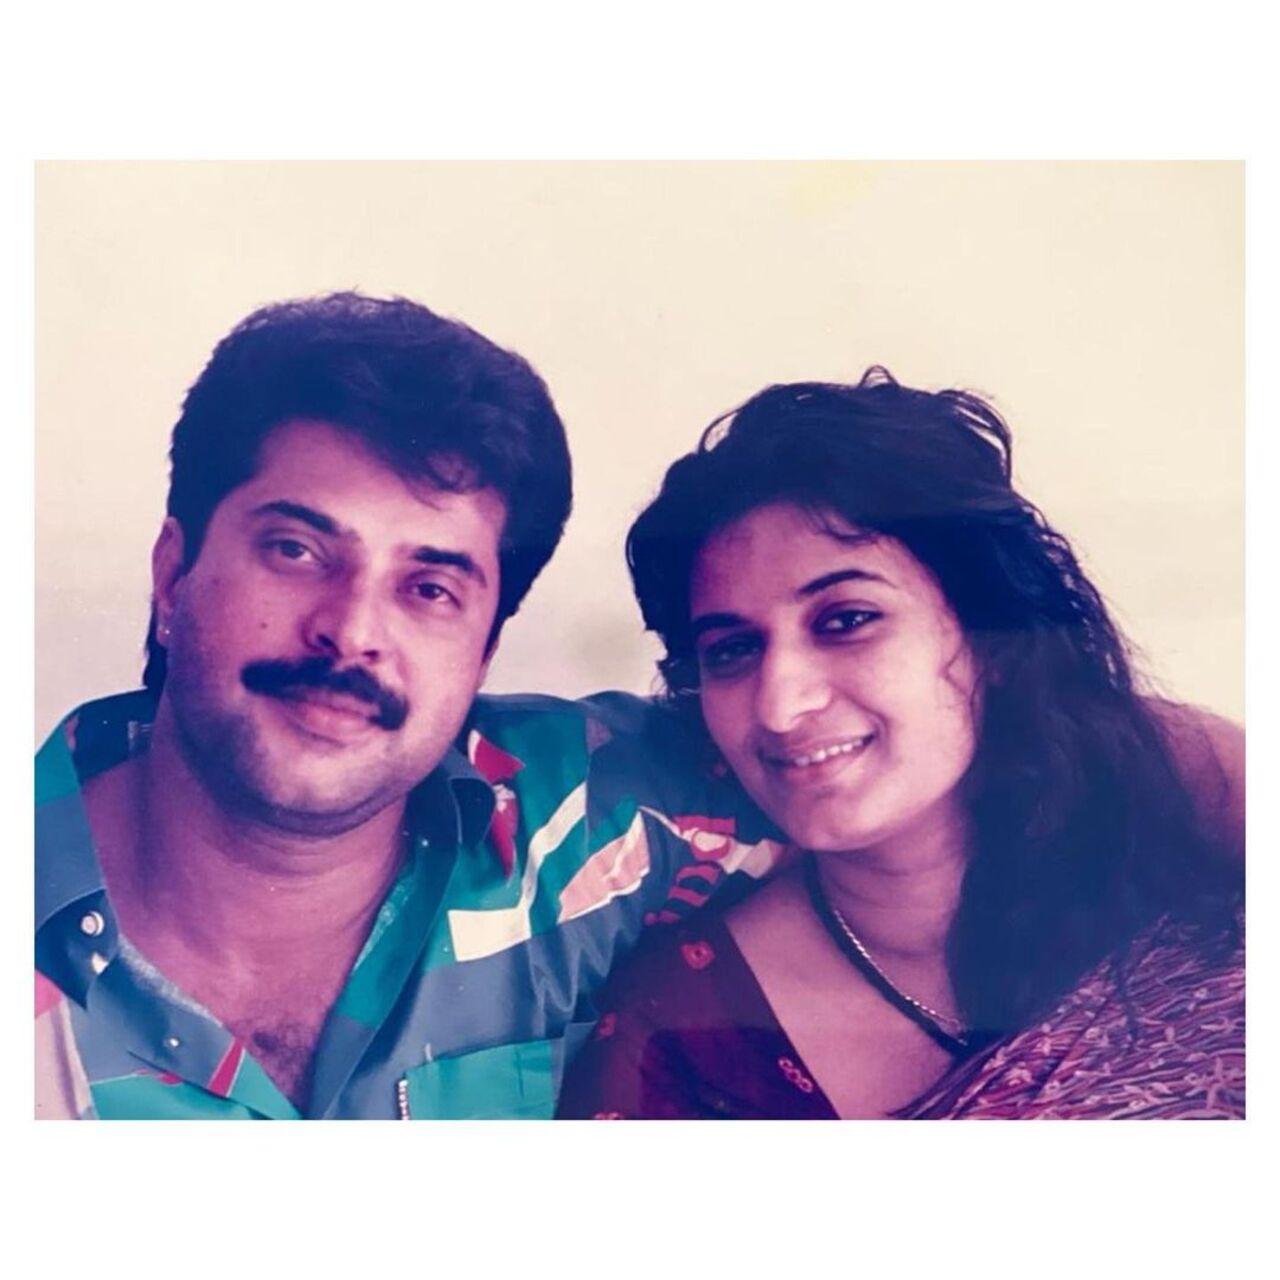 In 1979, Mammootty married Sulfath Kuttyy. Their was an arranged marriage